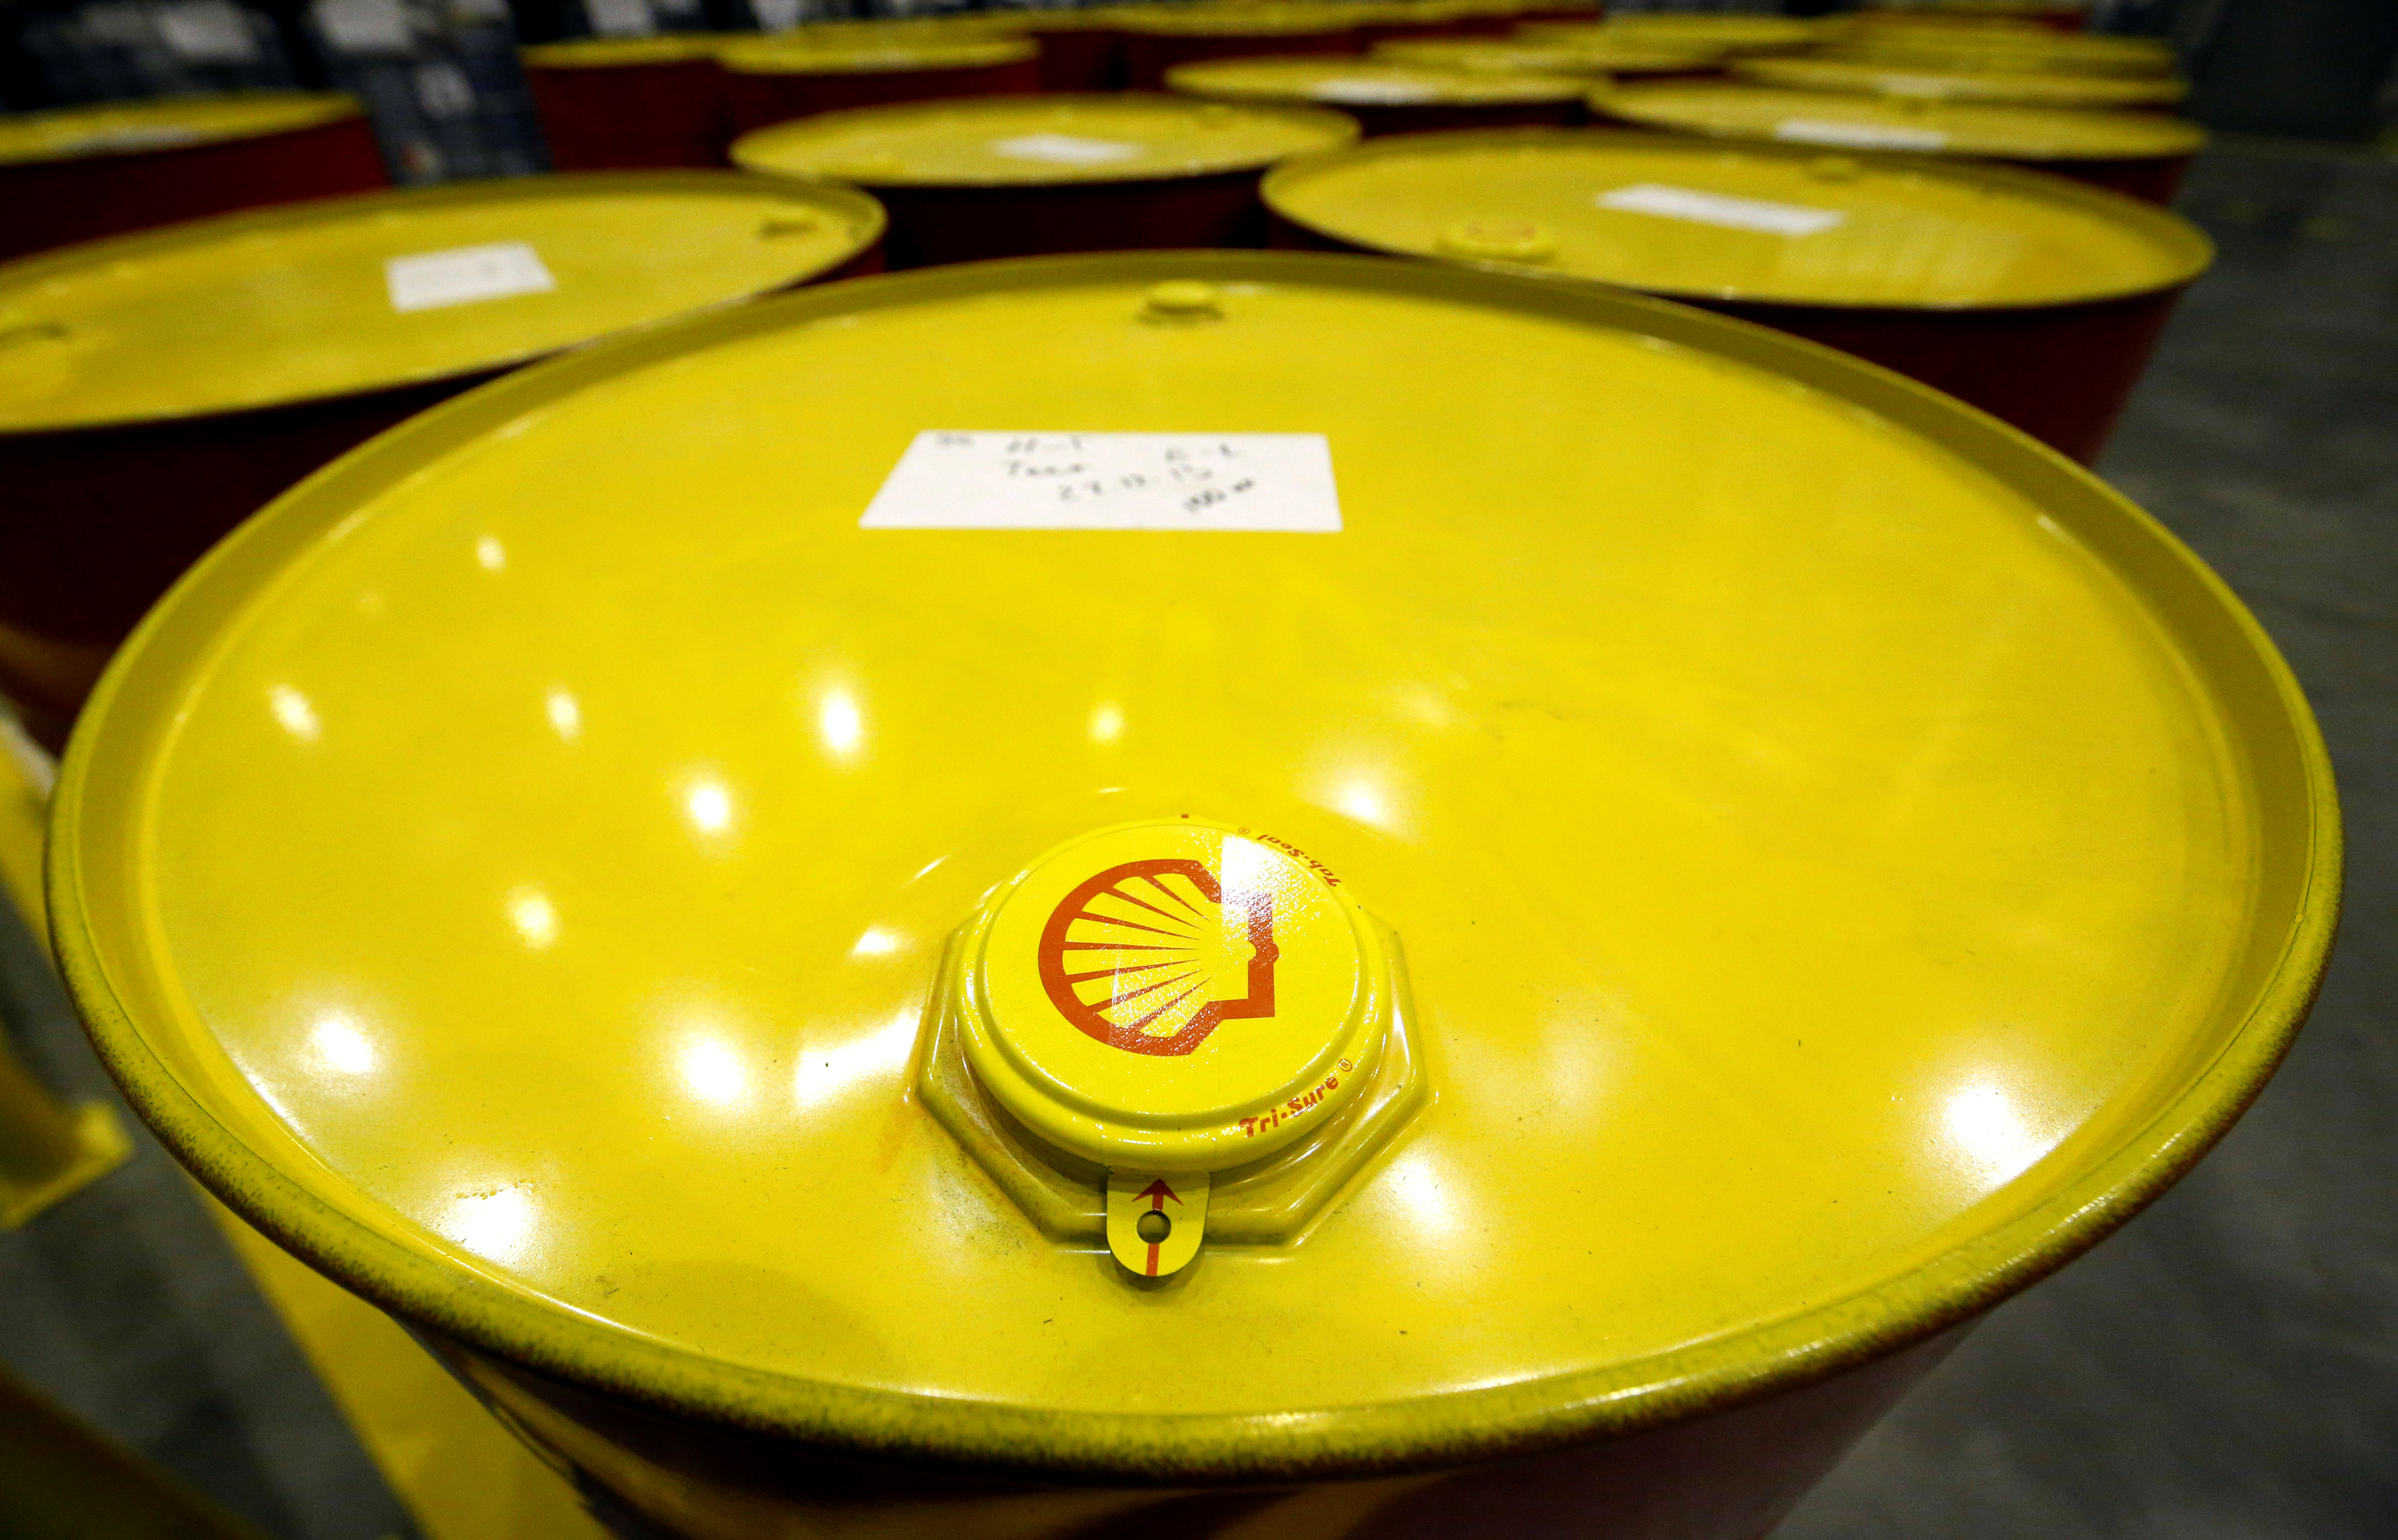 Filled oil drums are seen at Royal Dutch Shell Plc's lubricants blending plant in the town of Torzhok